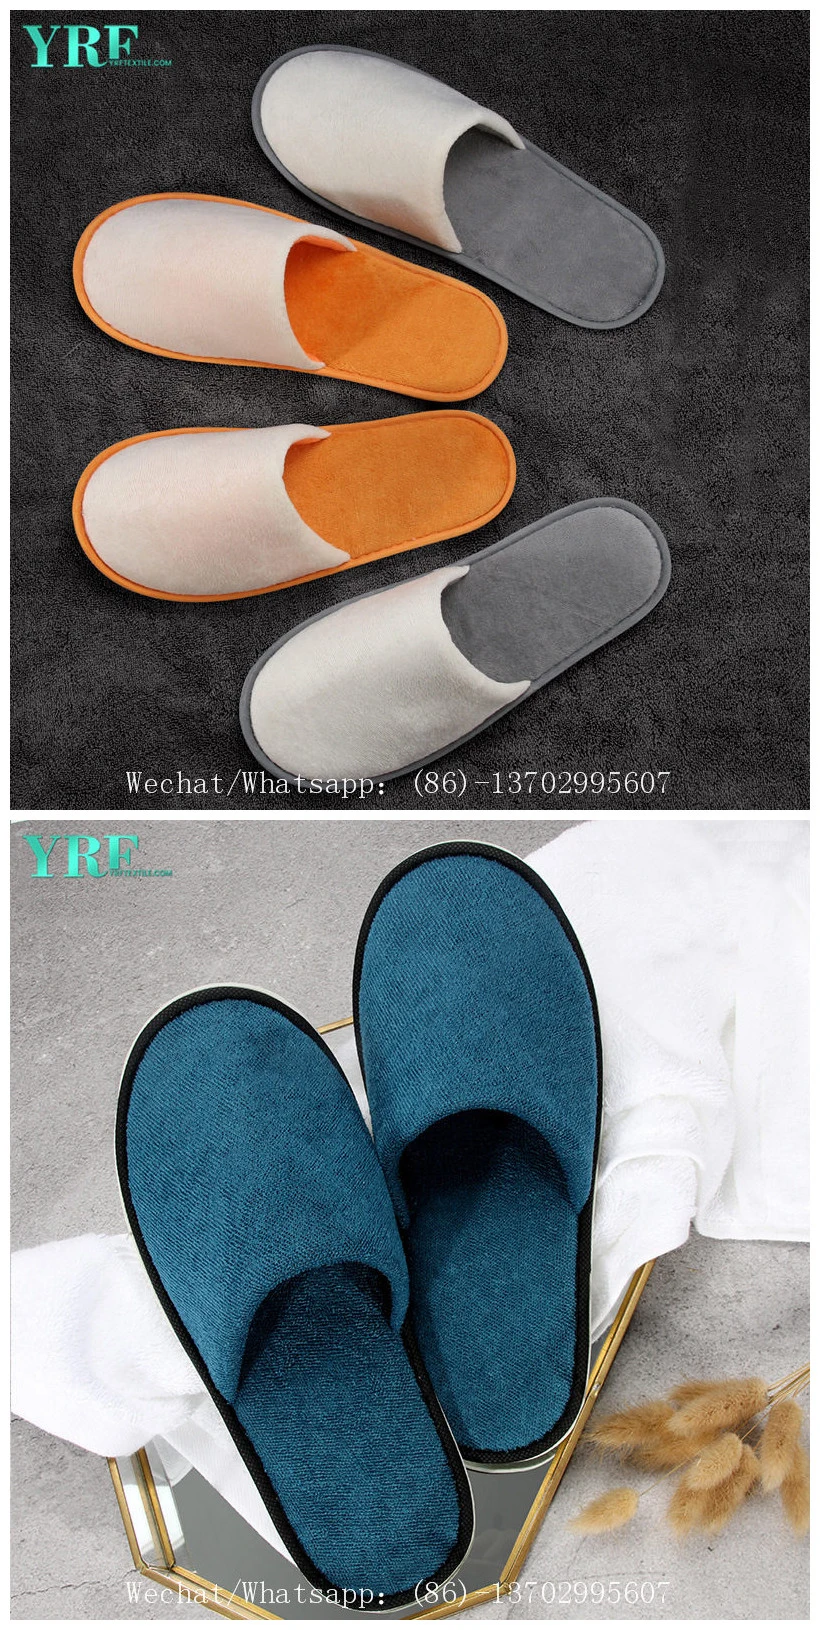 Yrf Personalized Hotel Products Women House Slippers Soft Sole Indoor Slippers